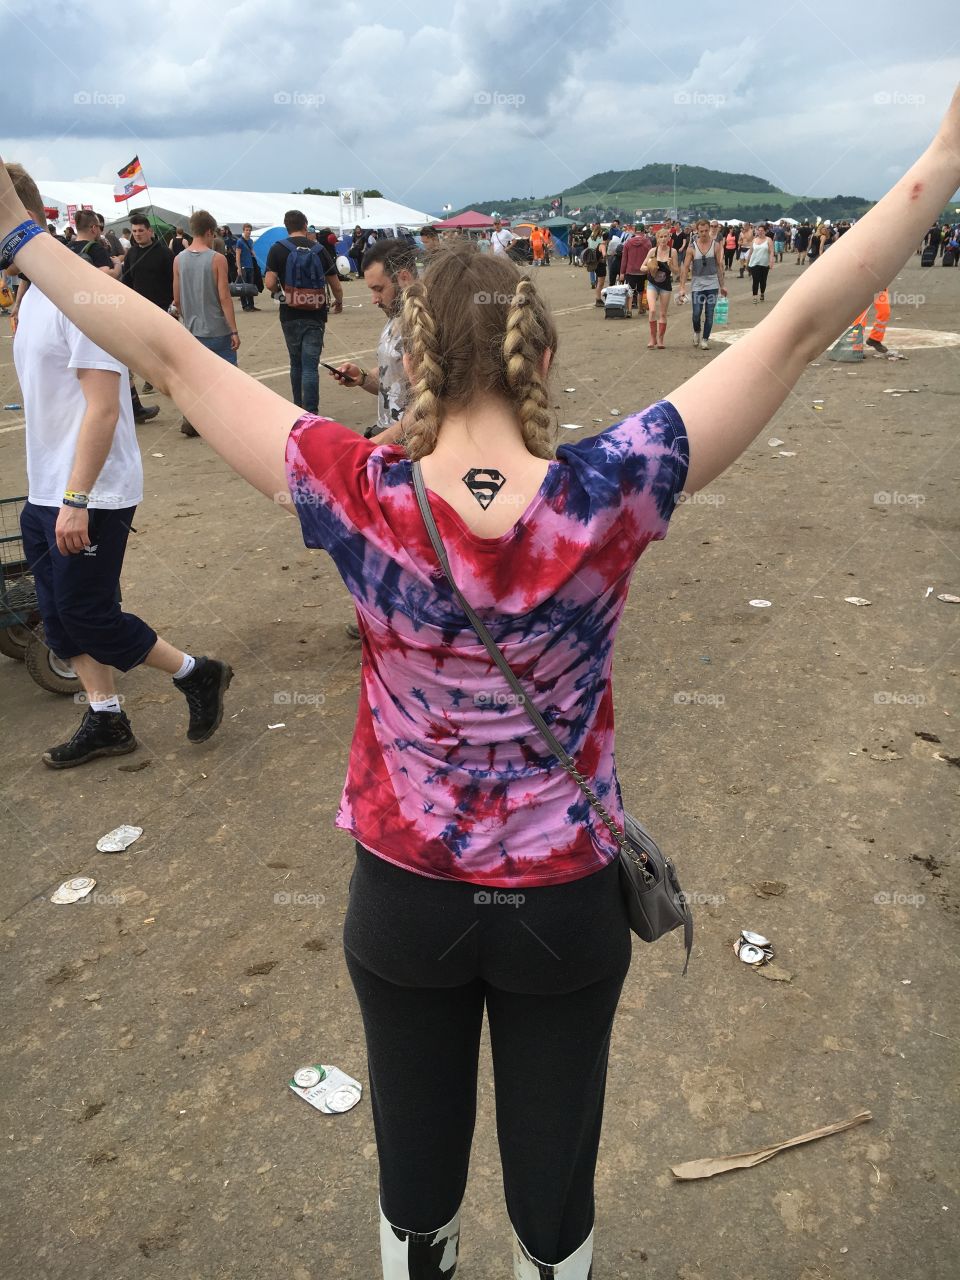 Supergirl on a Festival 